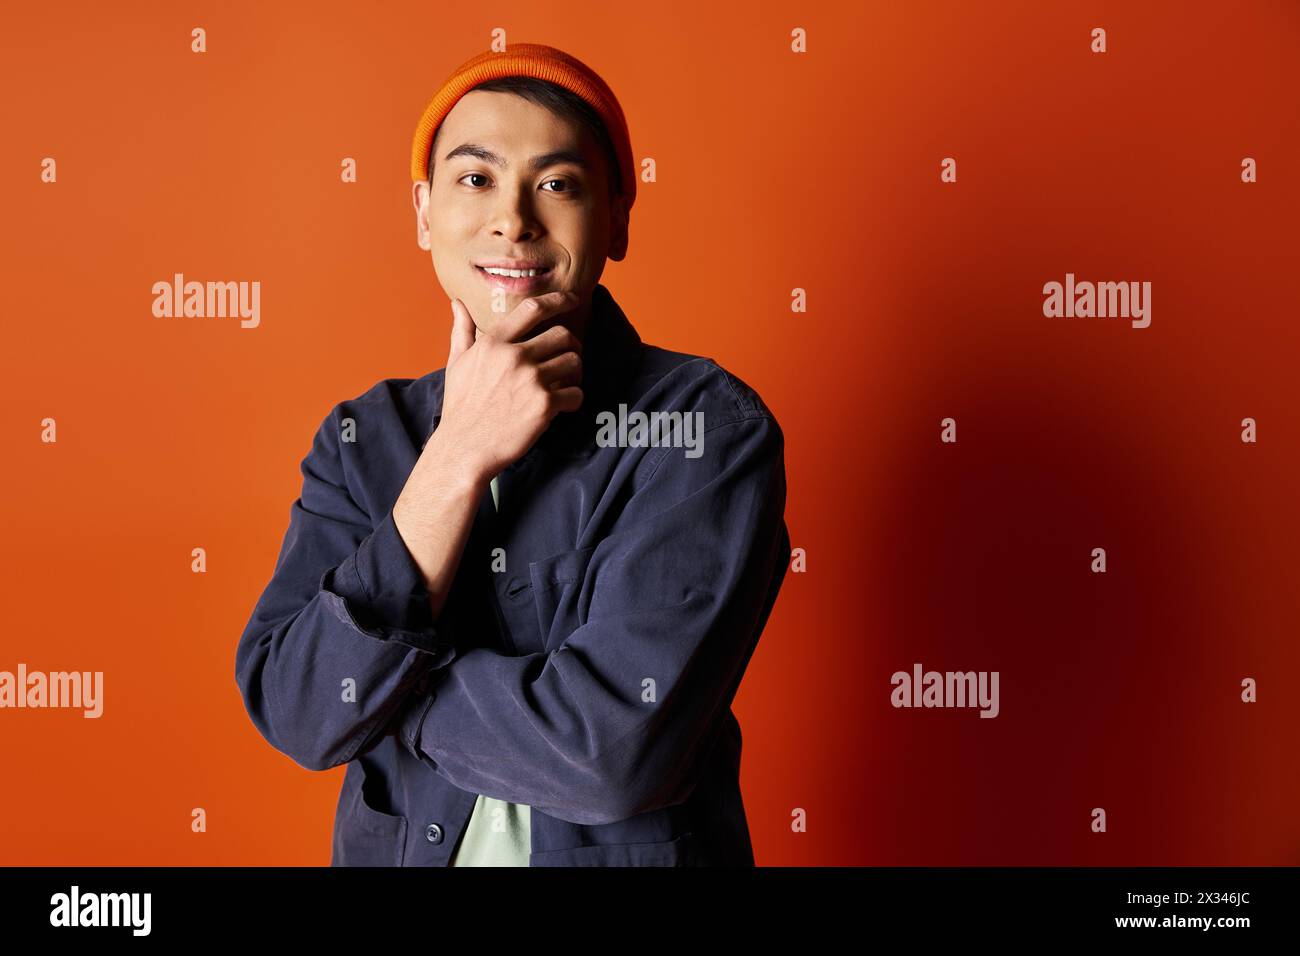 A handsome Asian man dressed in stylish attire stands confidently in front of an orange wall. Stock Photo